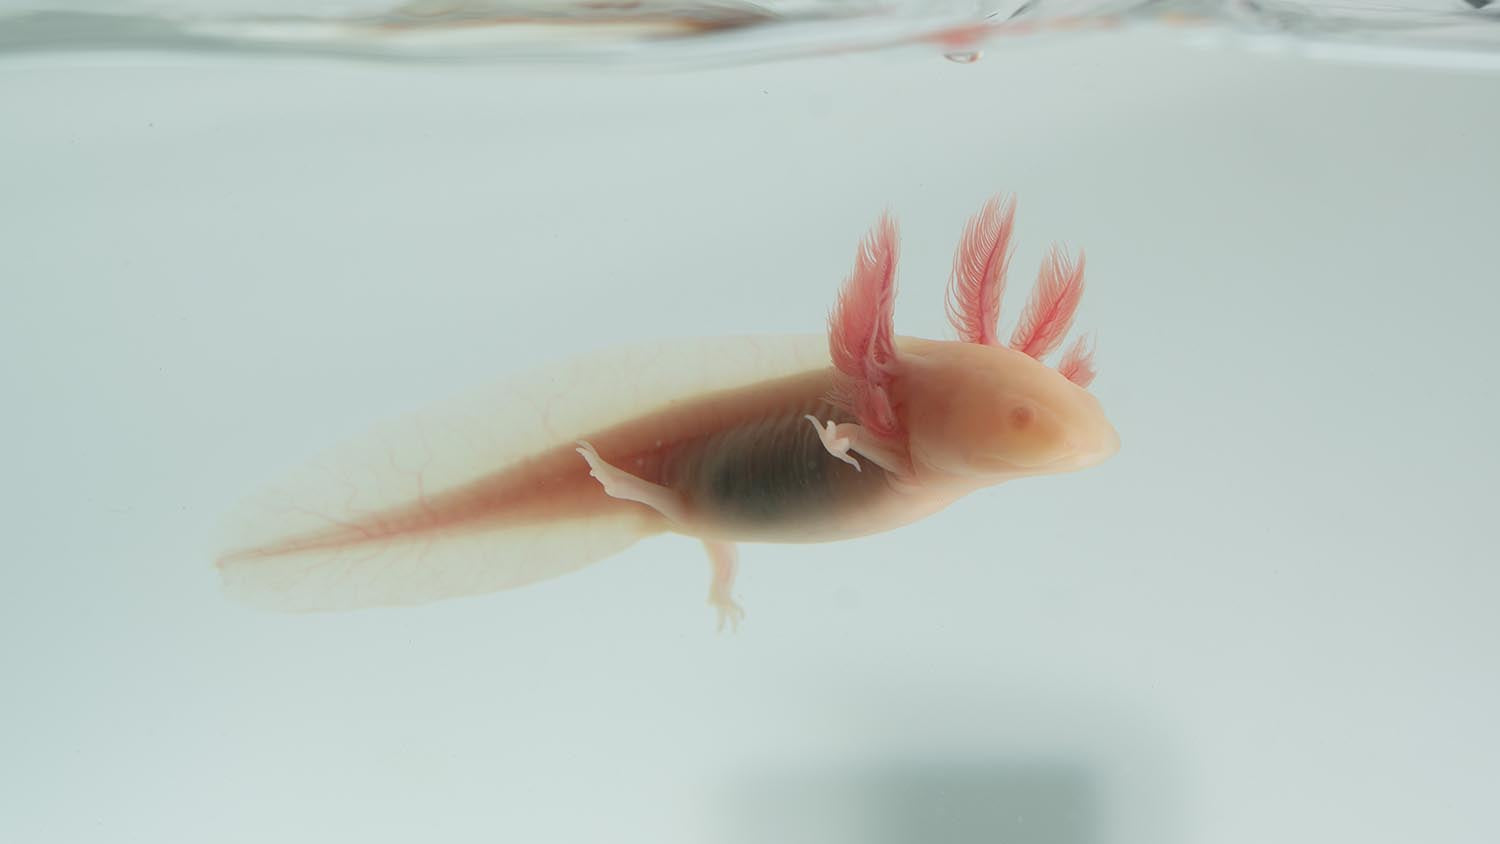 Axolotls to Buy: A Guide to Choosing Reputable Breeders and Making an Informed Purchase